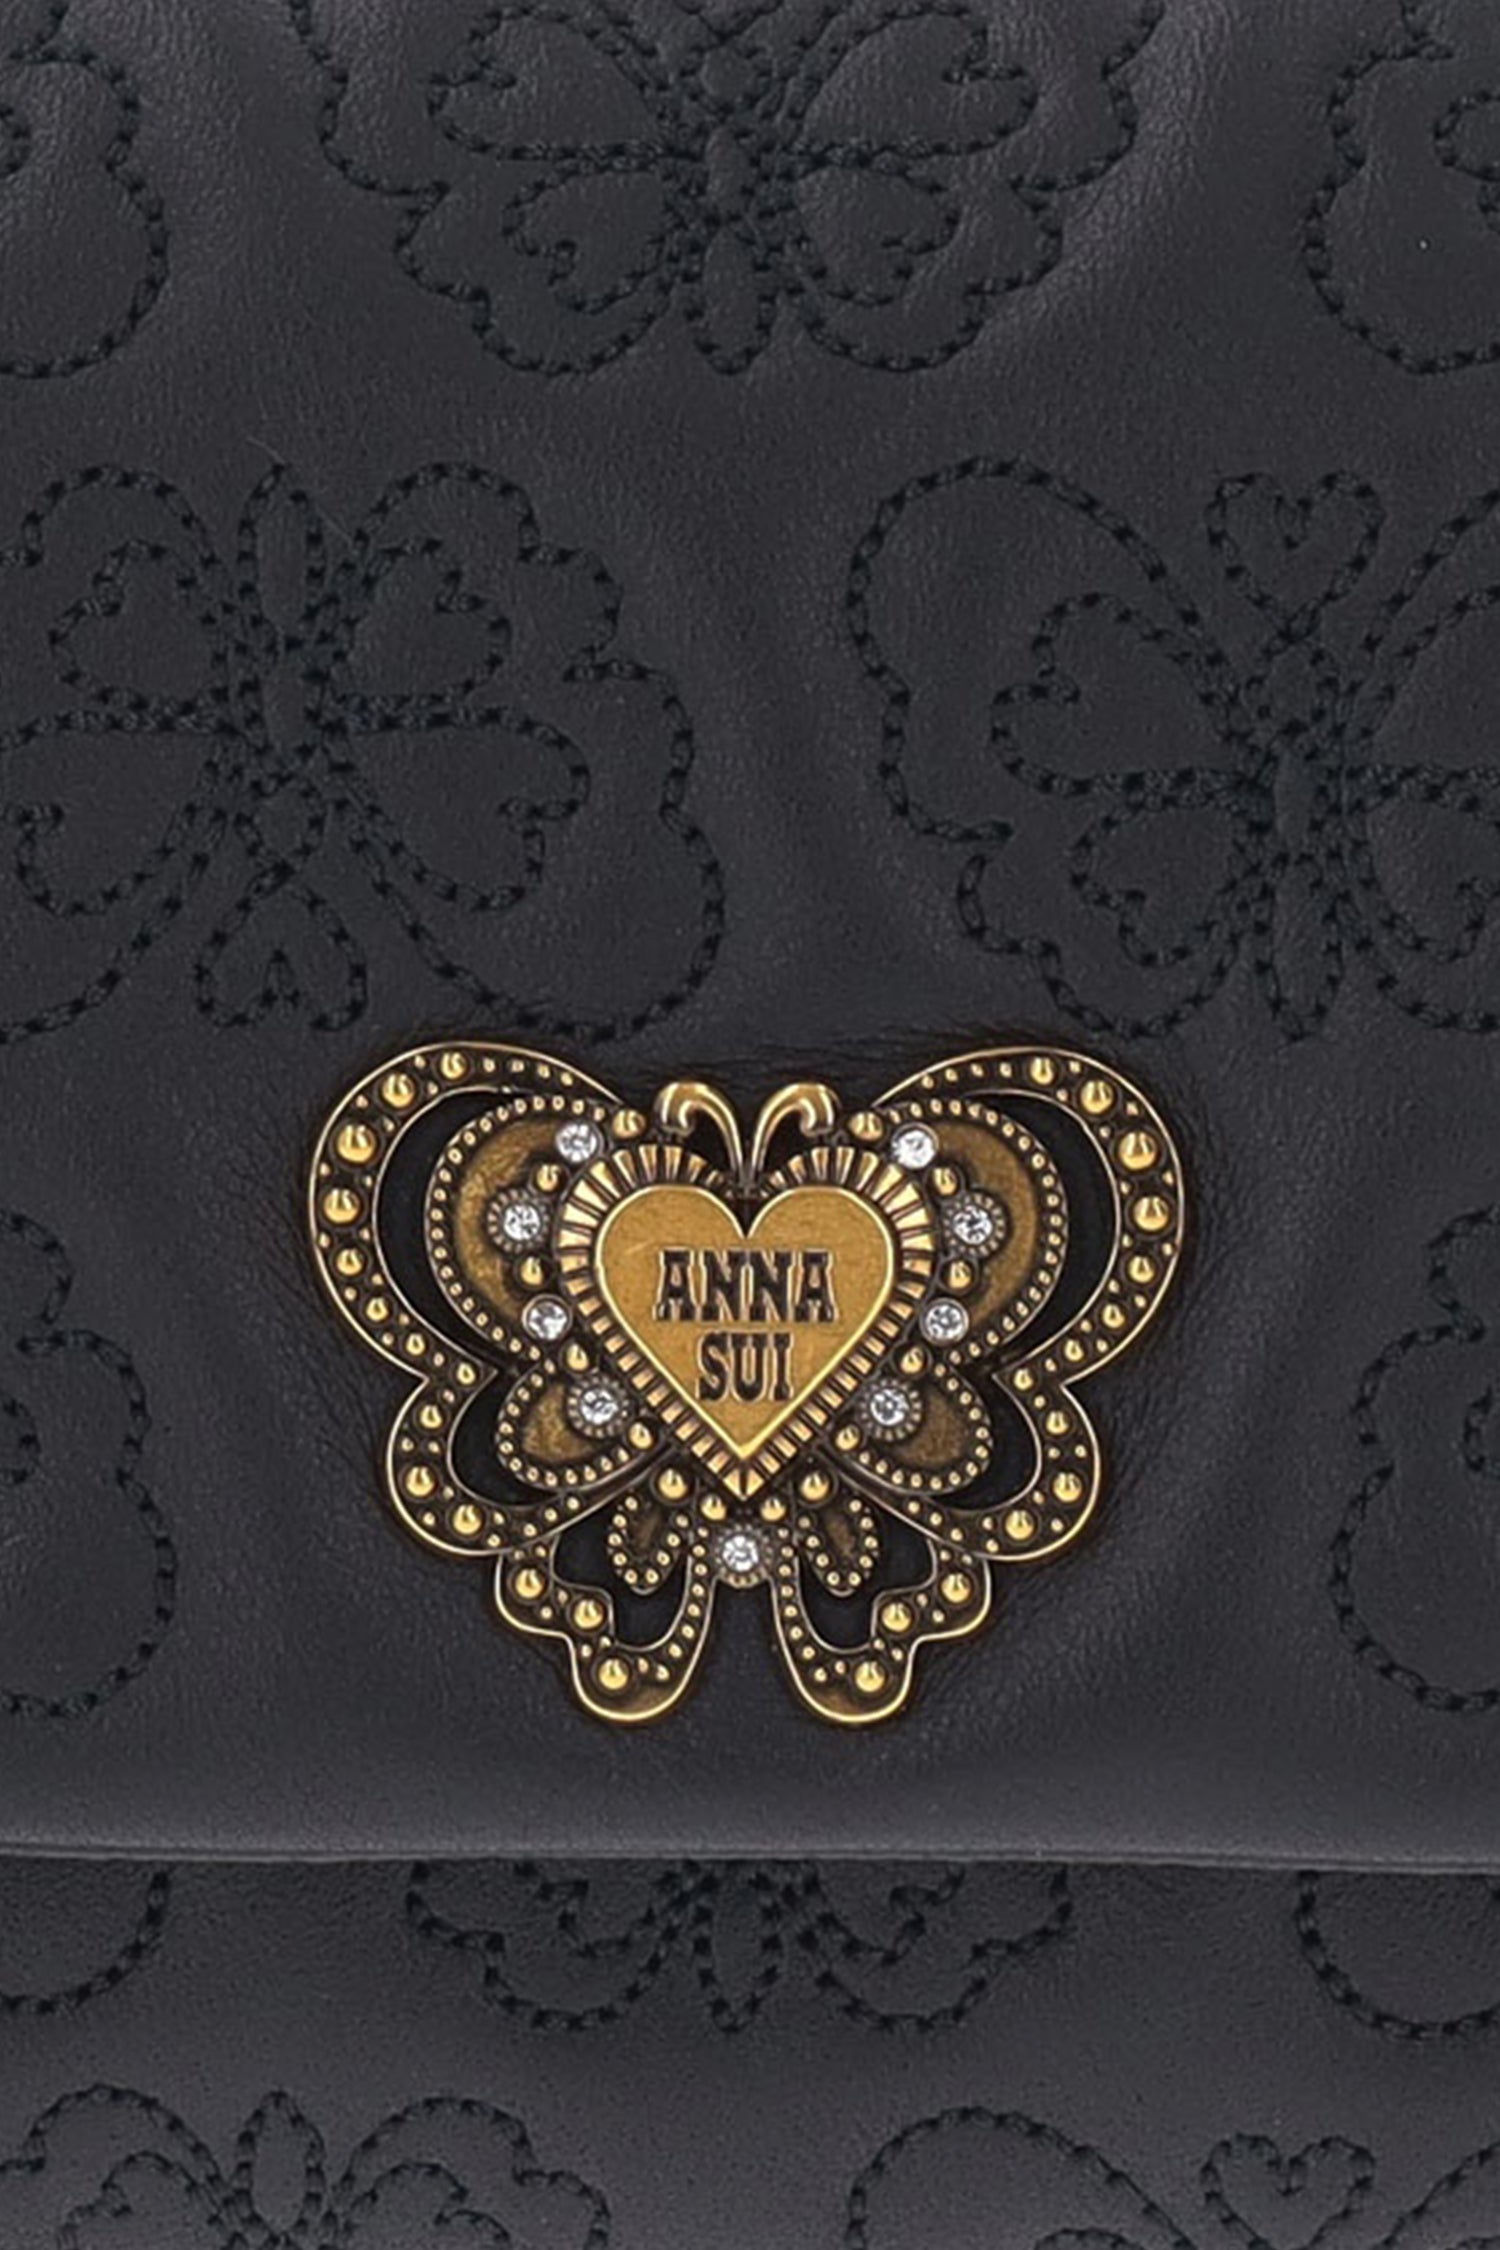 Detail of Anna Sui golden and gems butterfly hardware on flap, Butterfly embossed on leather  